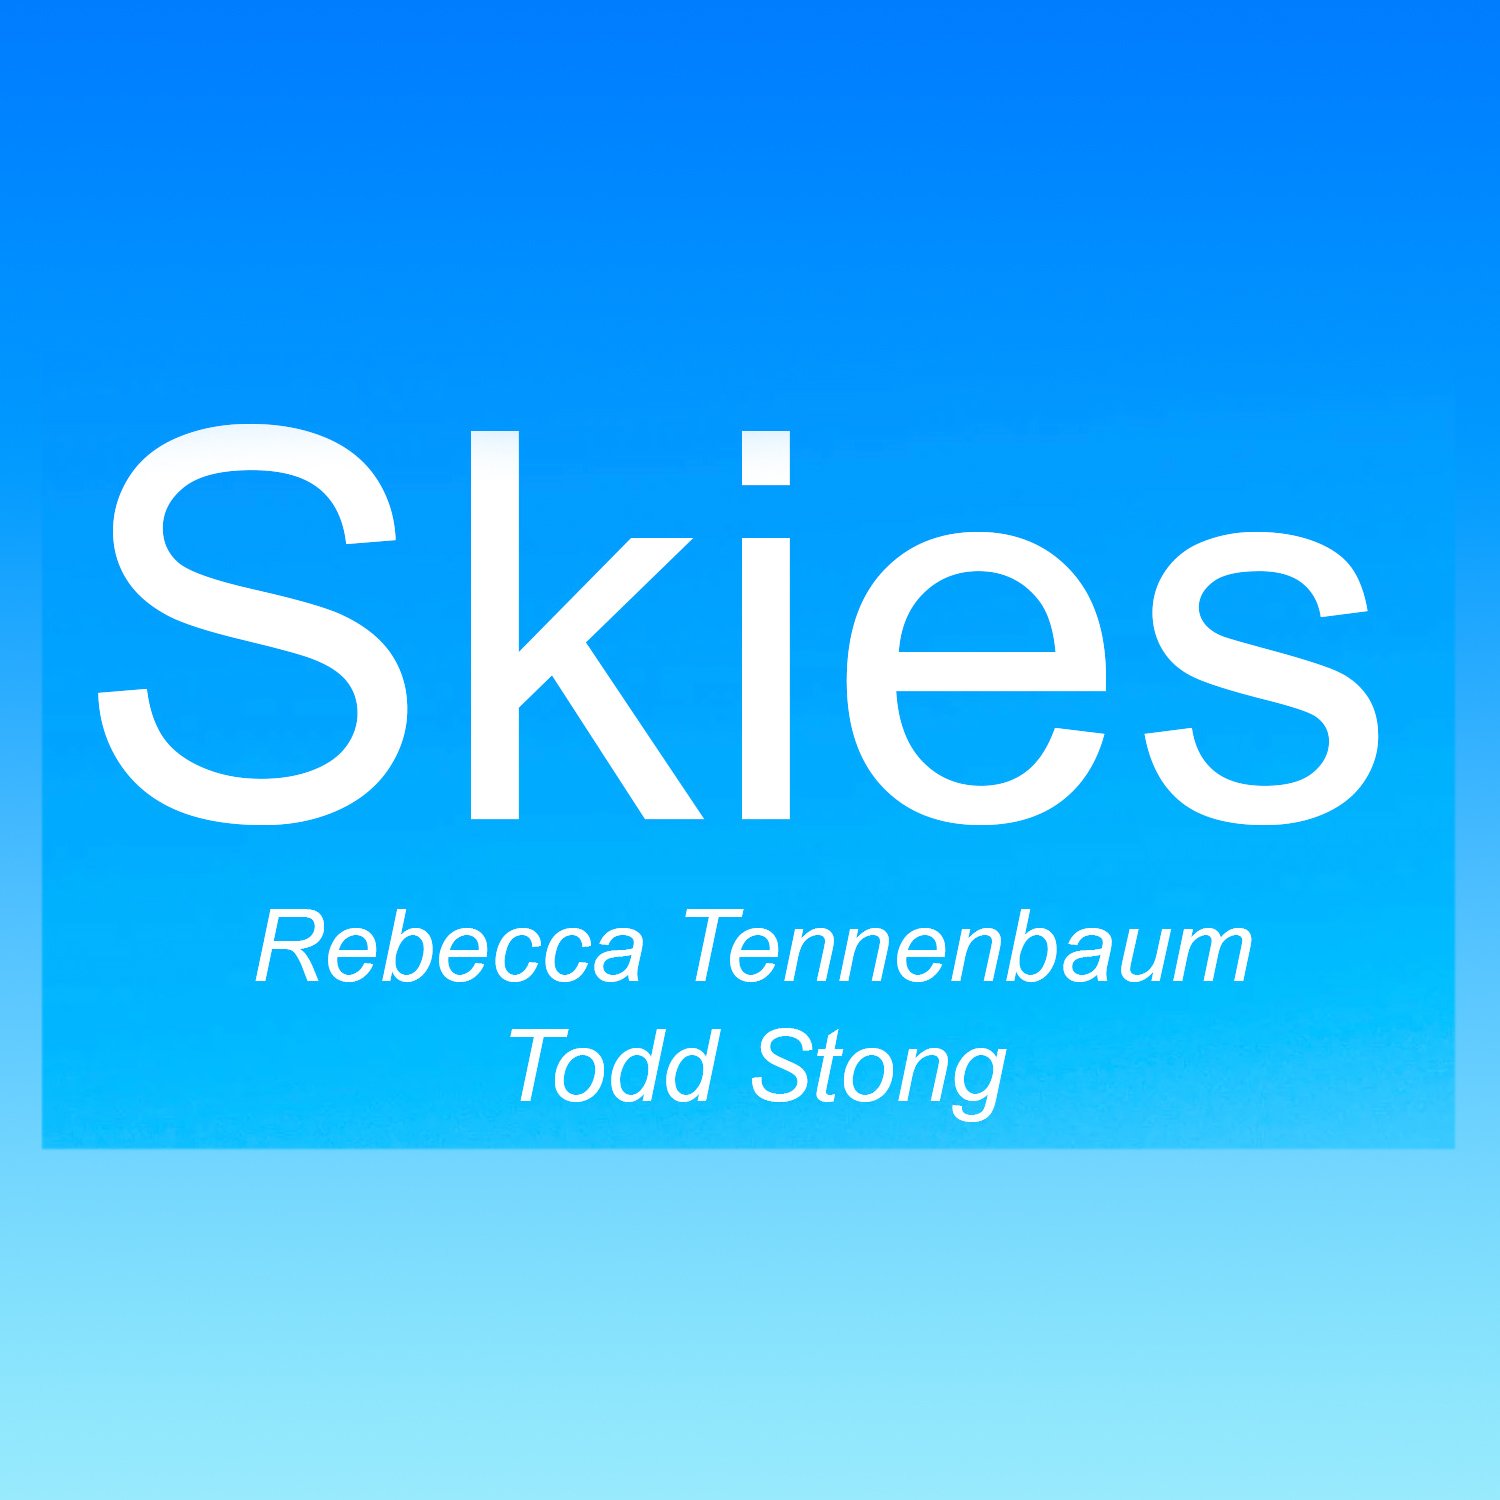 The word Skies and the artists' names against a blue background